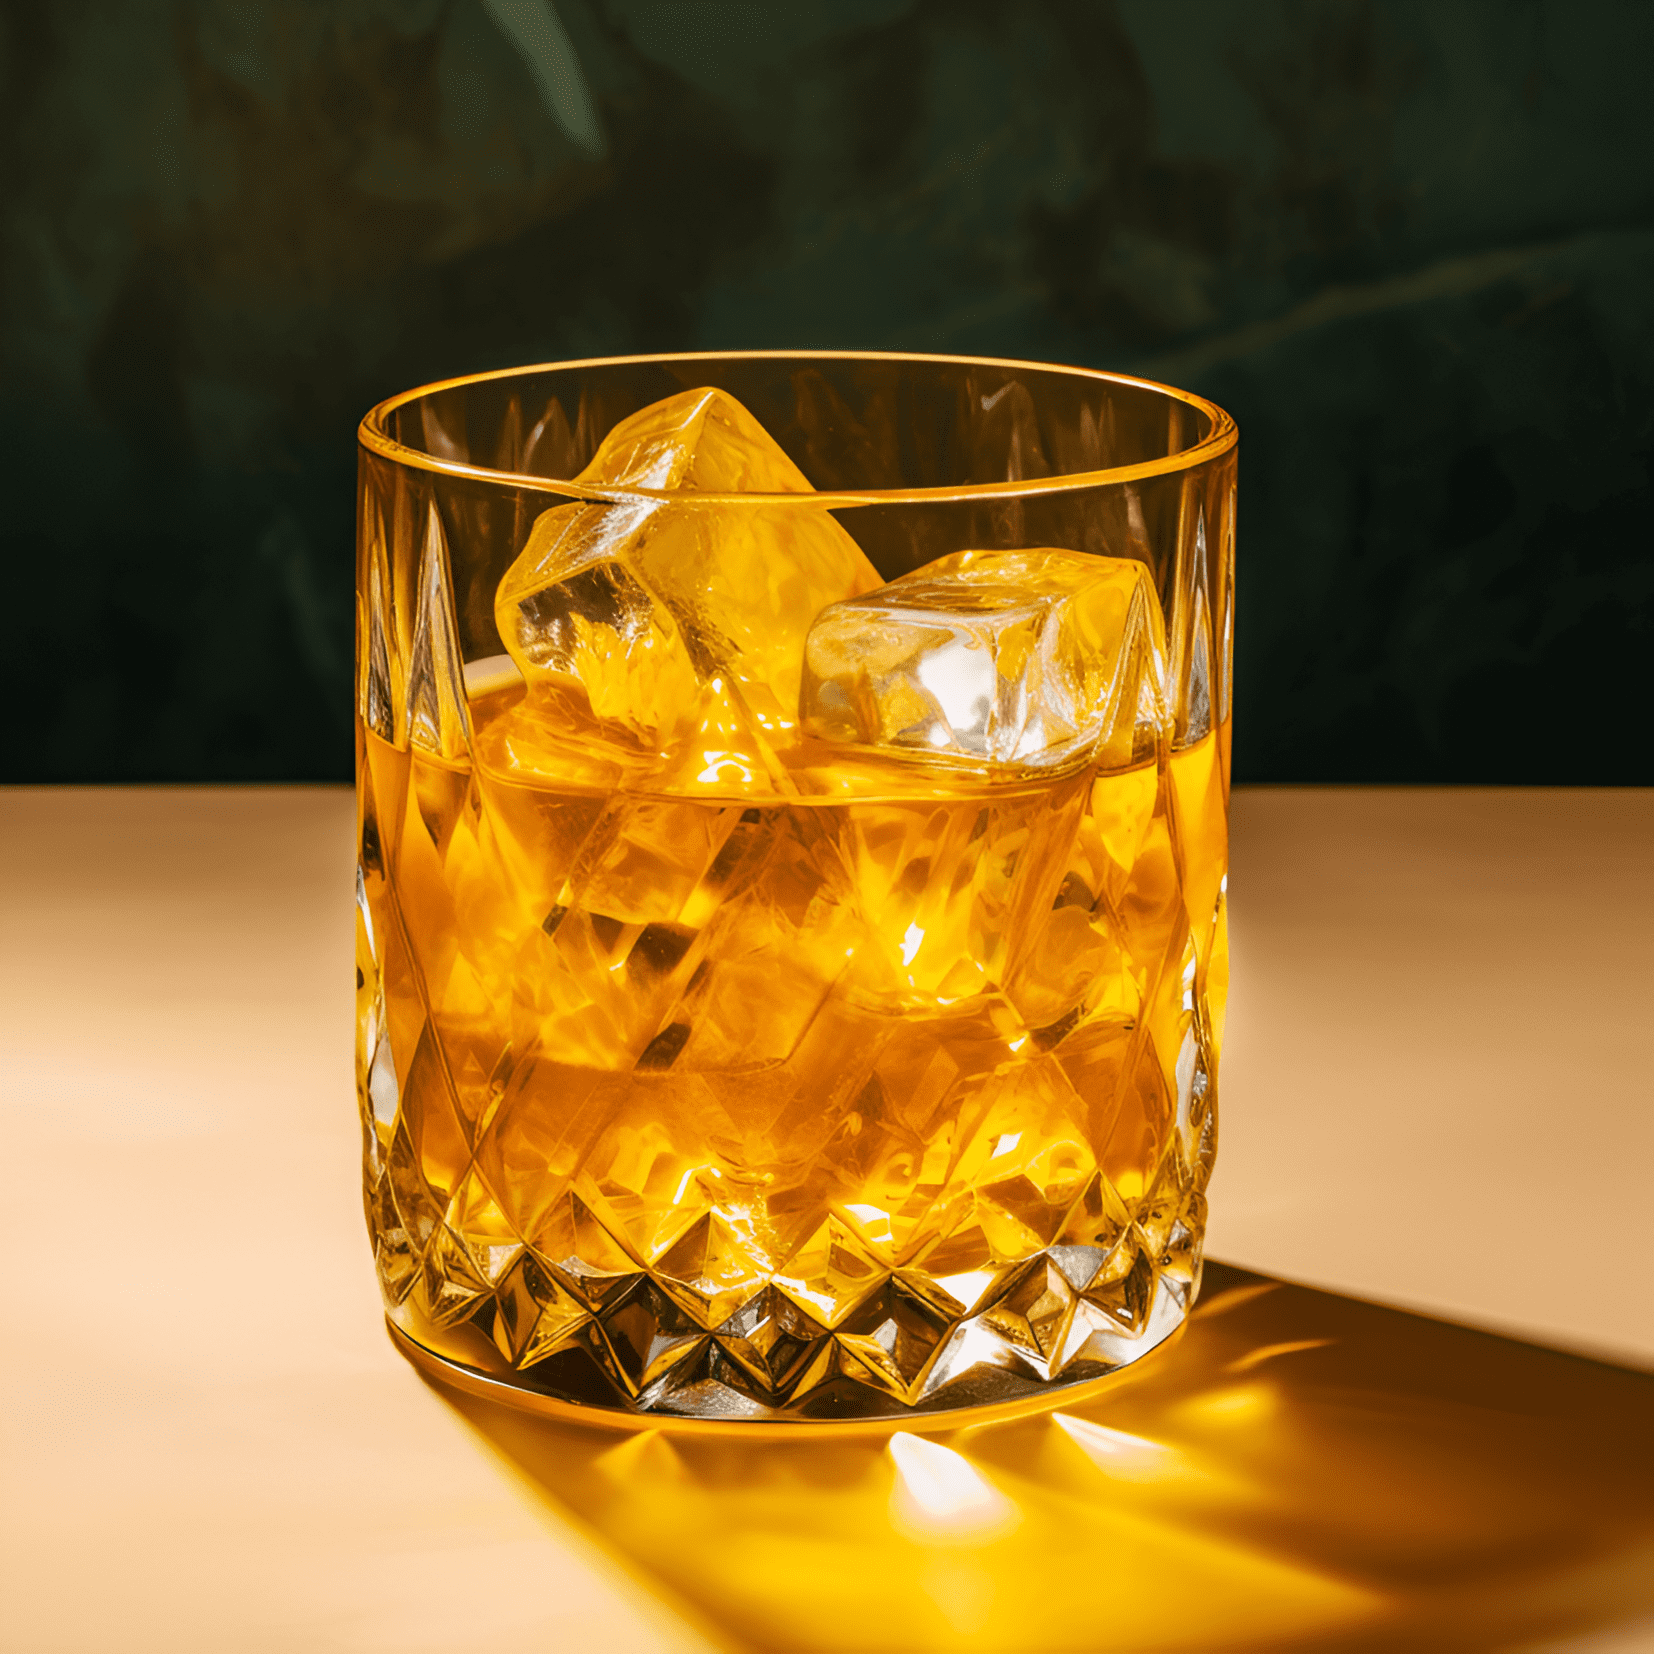 The Godmother cocktail is a smooth, sweet, and slightly nutty drink with a hint of warmth from the vodka. It is well-balanced, with the amaretto providing a rich, almond-like sweetness that complements the strong, clean taste of the vodka.